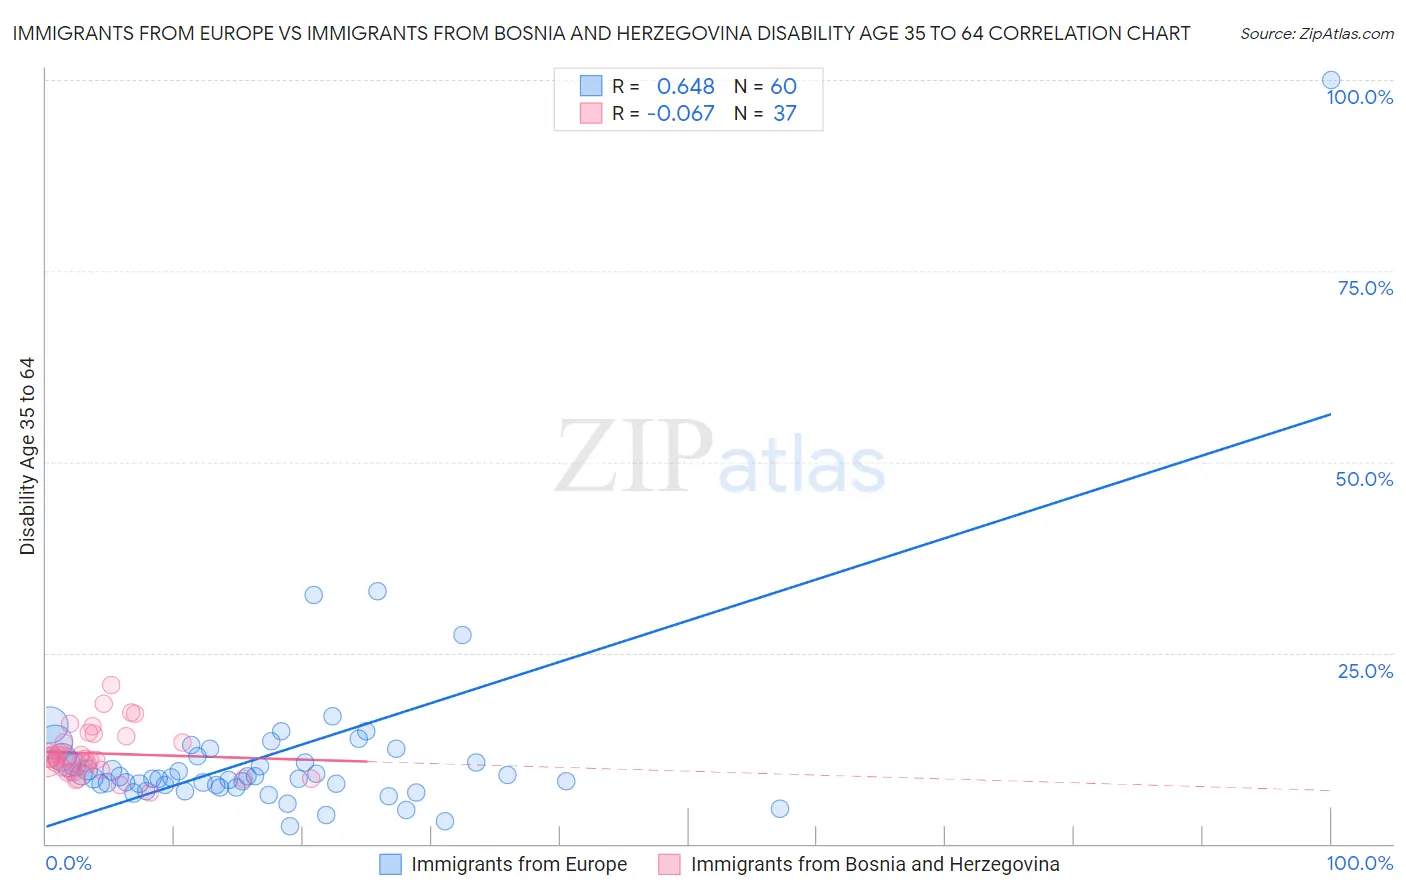 Immigrants from Europe vs Immigrants from Bosnia and Herzegovina Disability Age 35 to 64